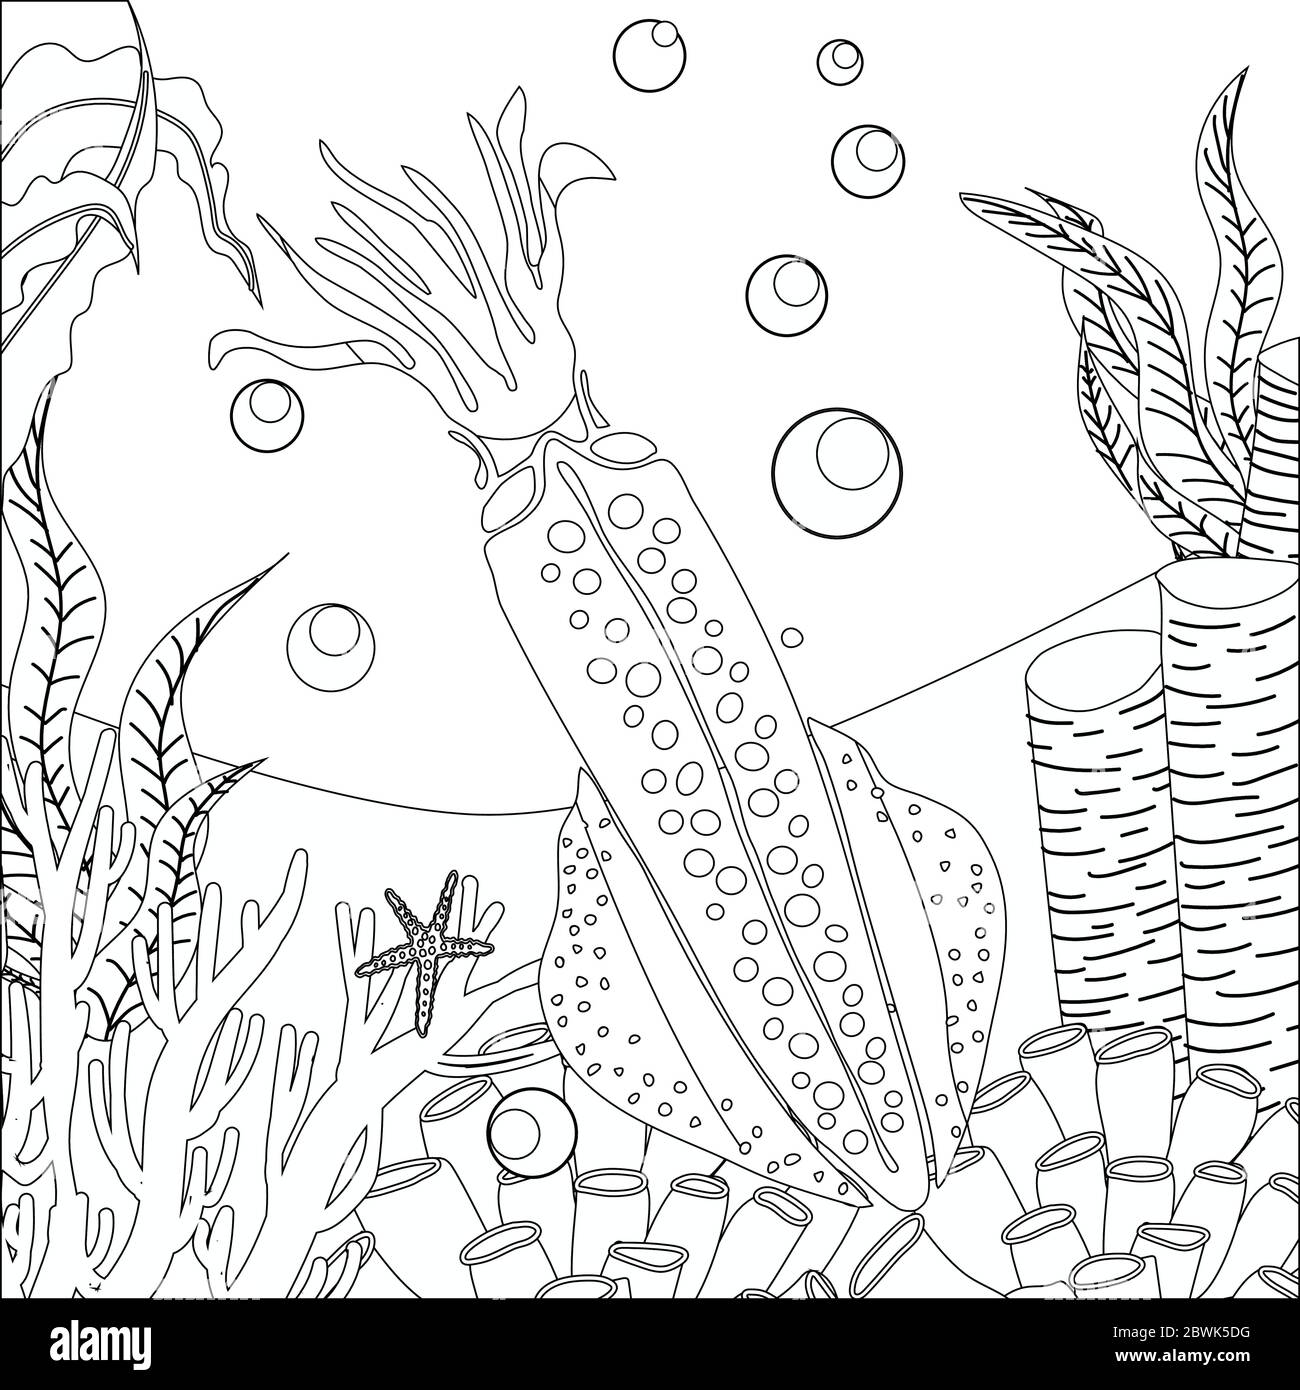 Download Squid Cuttlefish Octopus Coloring Page Antistress Coloring Book For Adults And Children Marine Life Ocean Animals Stock Vector Image Art Alamy